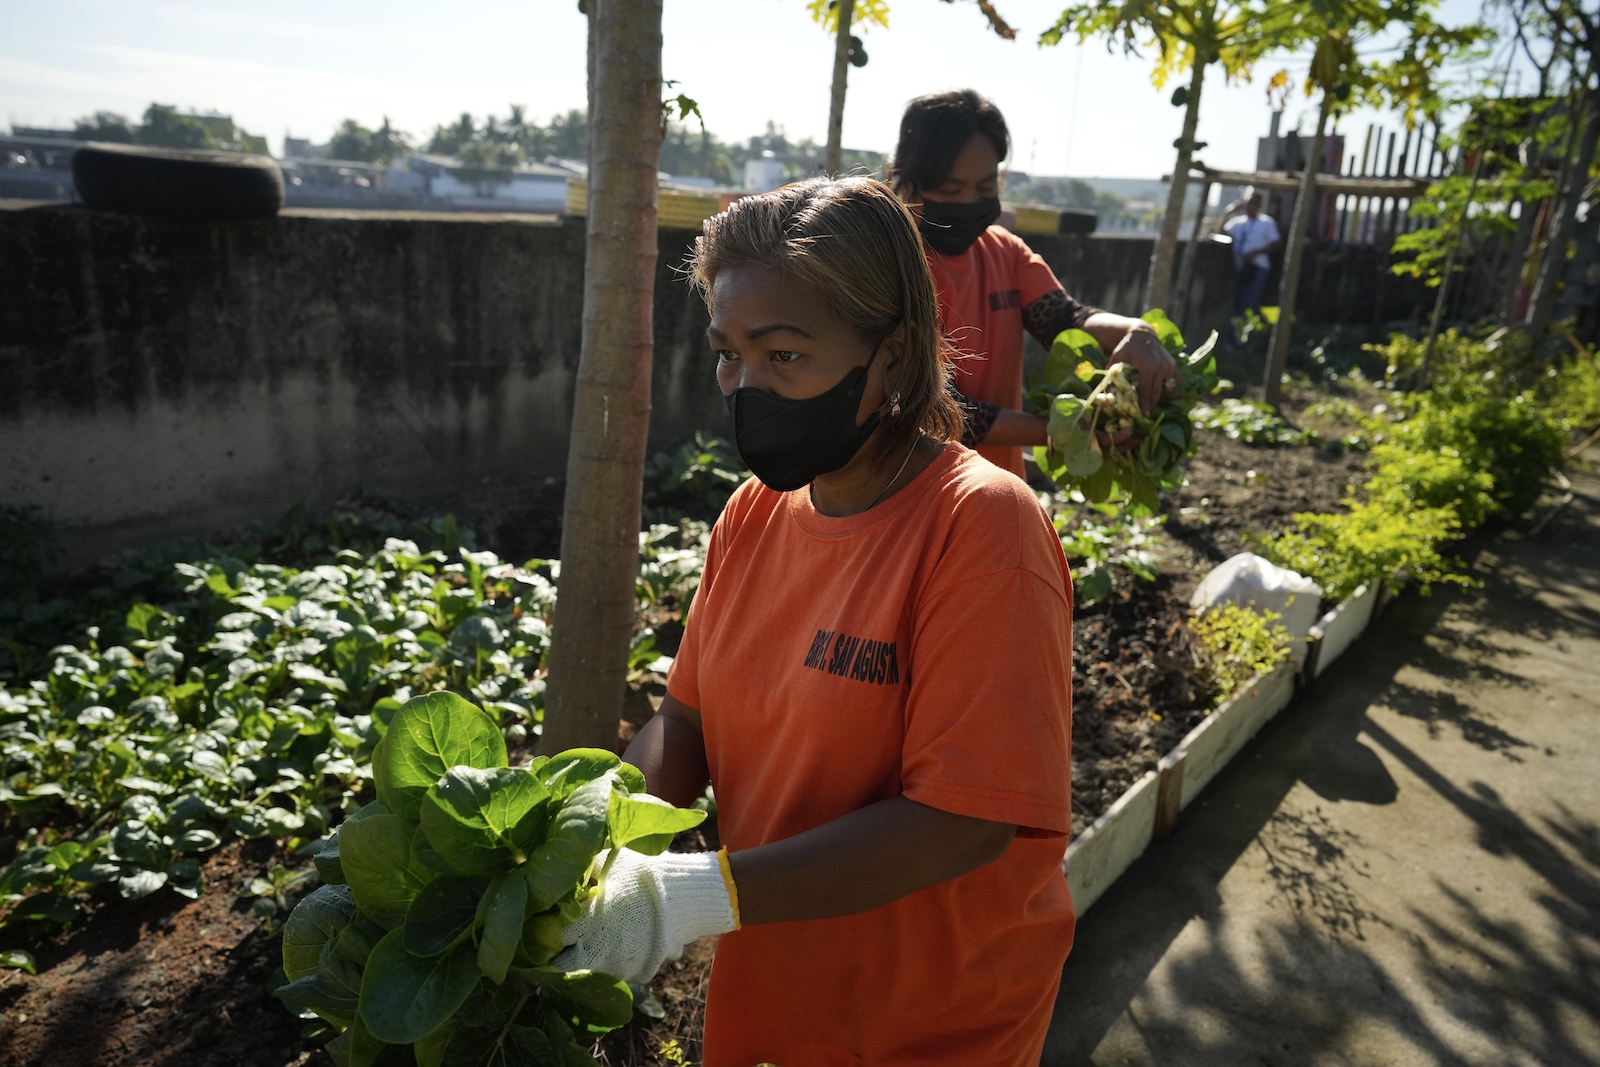 A woman in an orange t-shirt holds a leafy plant near raised beds in an urban setting